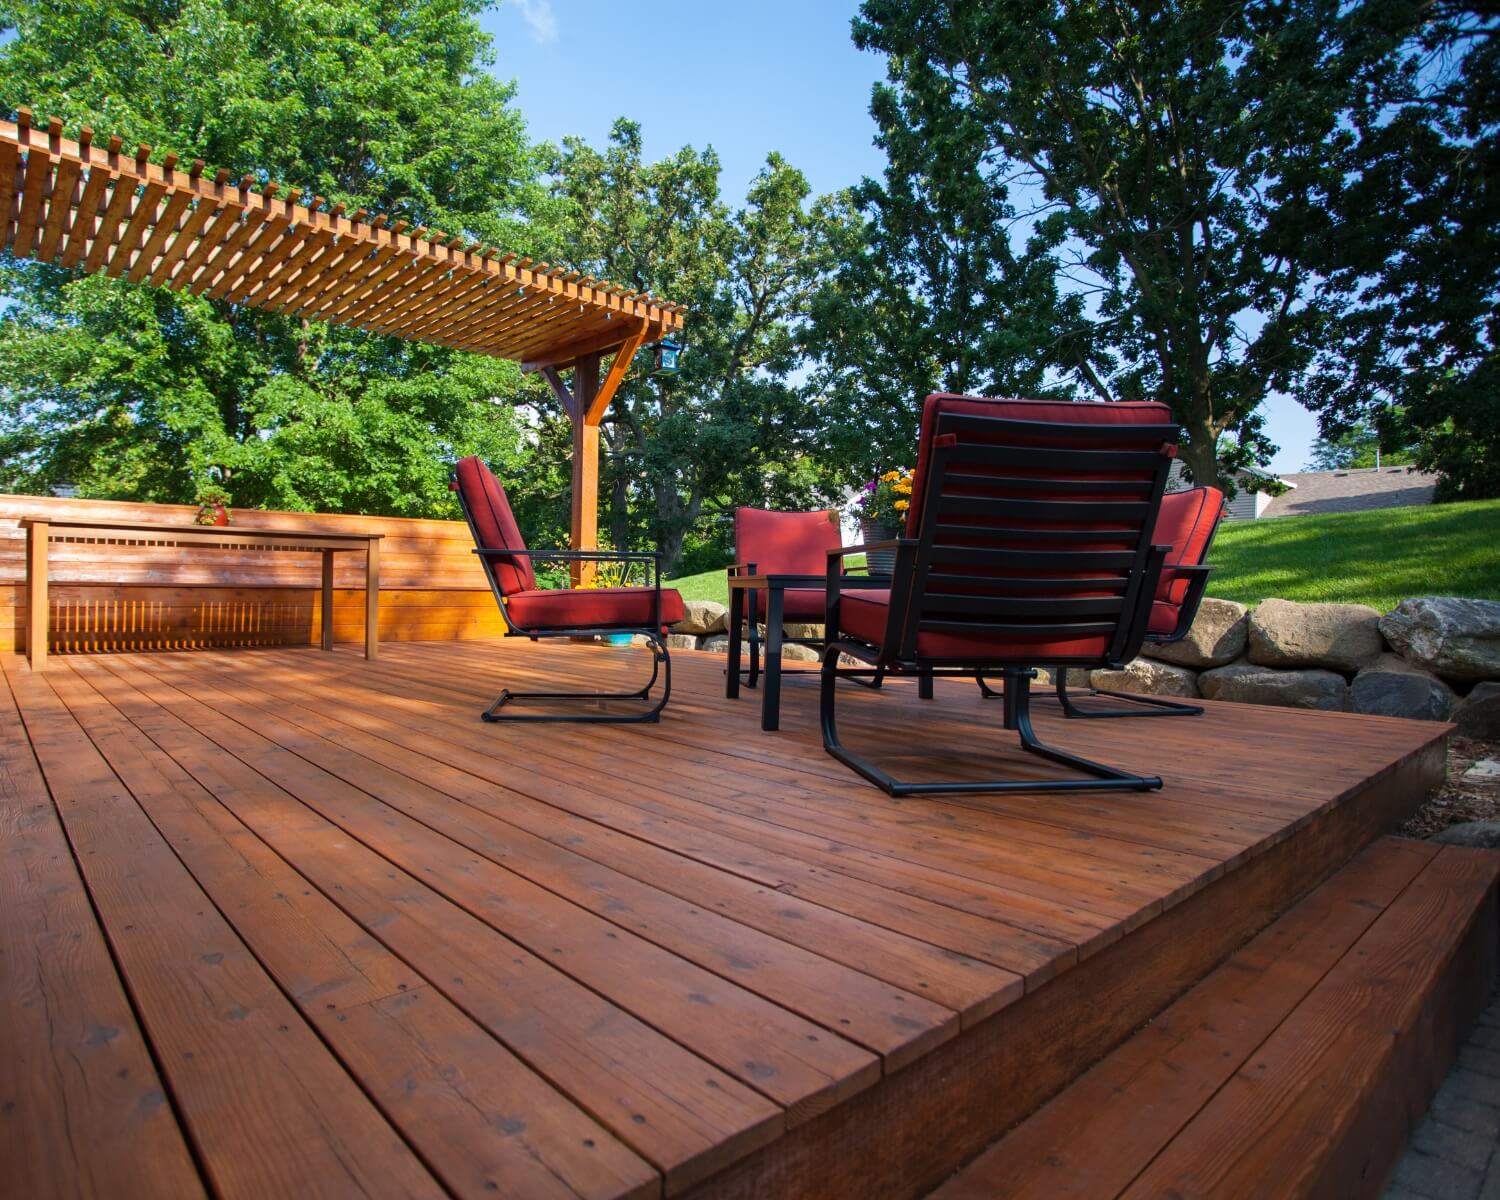 Transform Your Outdoor Space With Easy-To-Install Decking Kits - Timber DIY